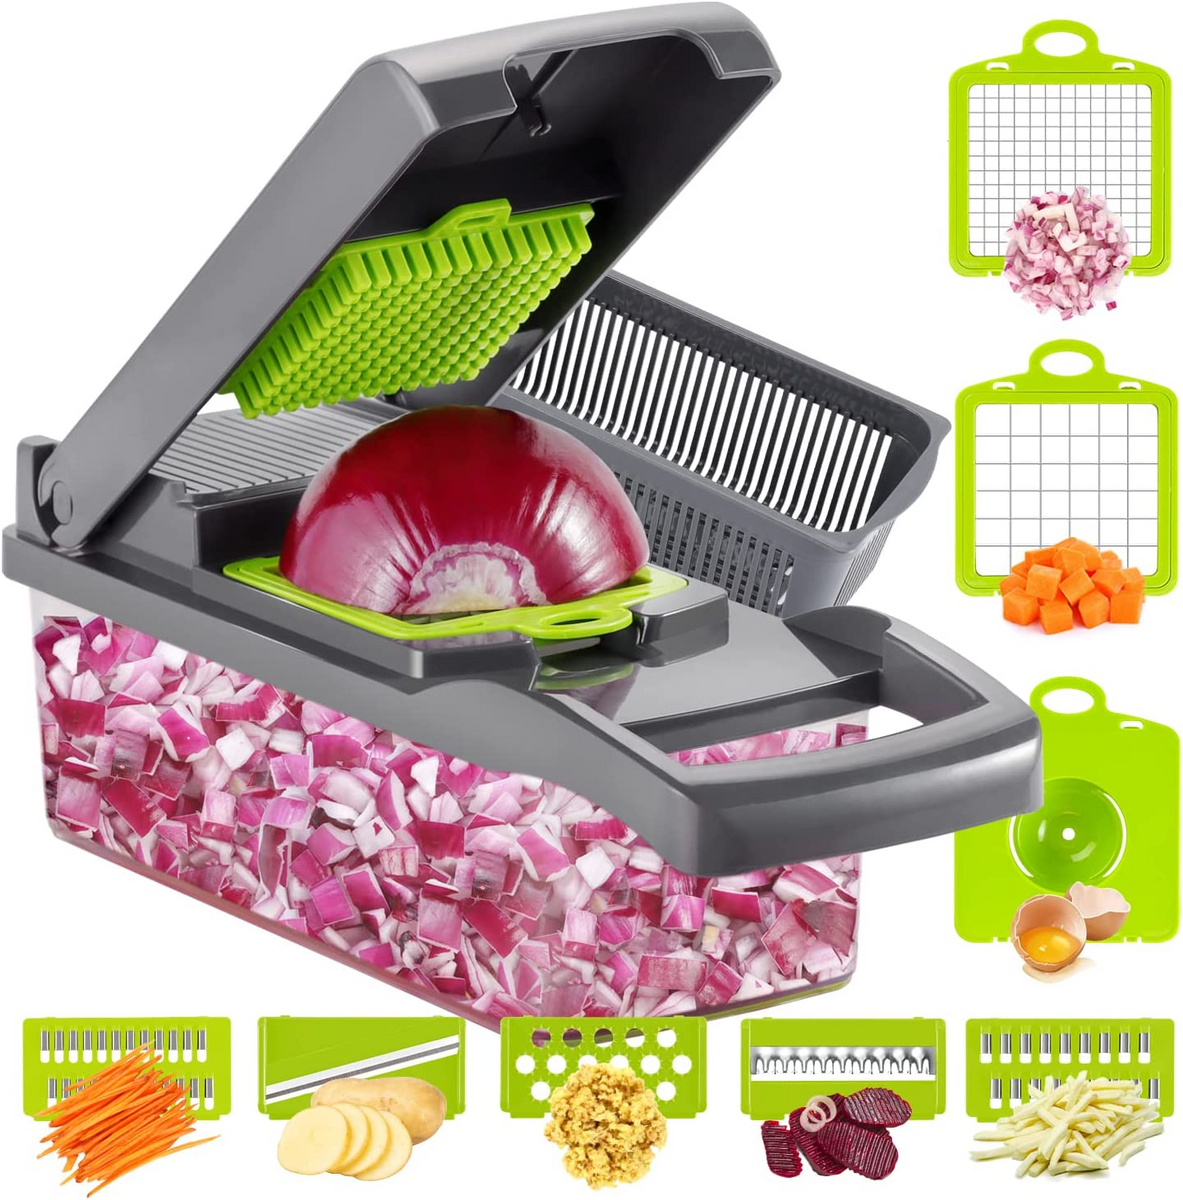 RAIQEE Vegetable Chopper Review - Does It Really Work? 